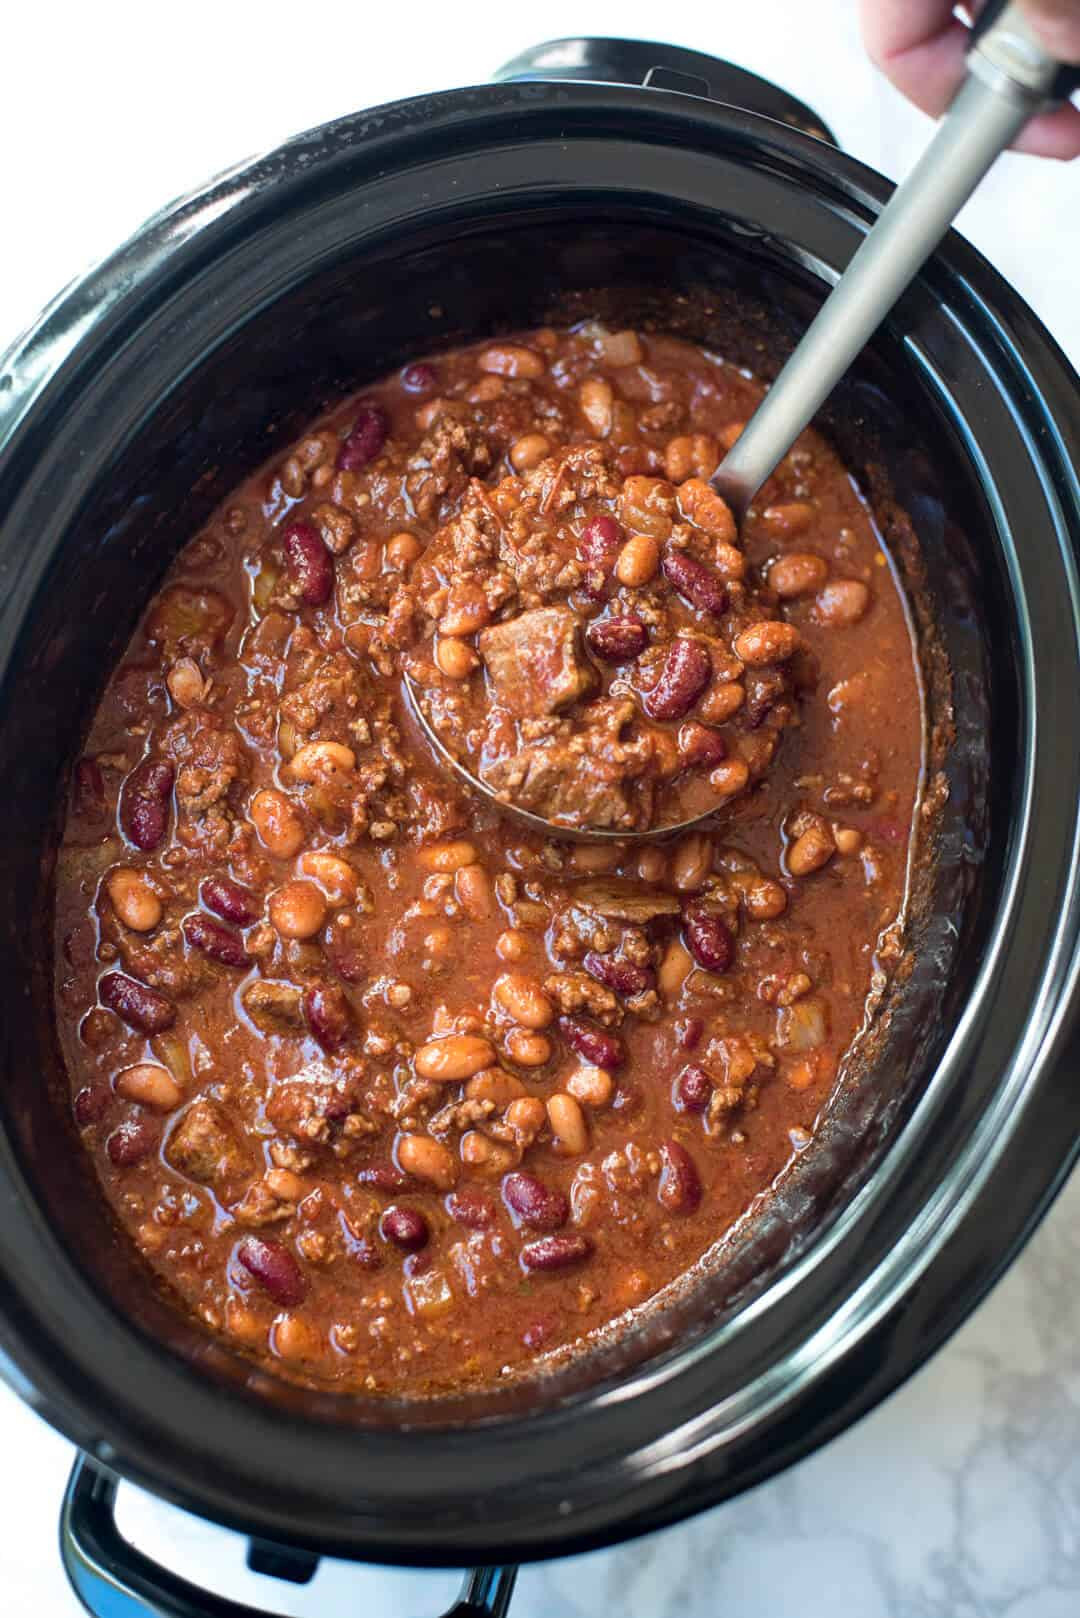 Pinto Beans And Ground Beef Recipe Slow Cooker
 Slow Cooker Double Beef and Bean Chili